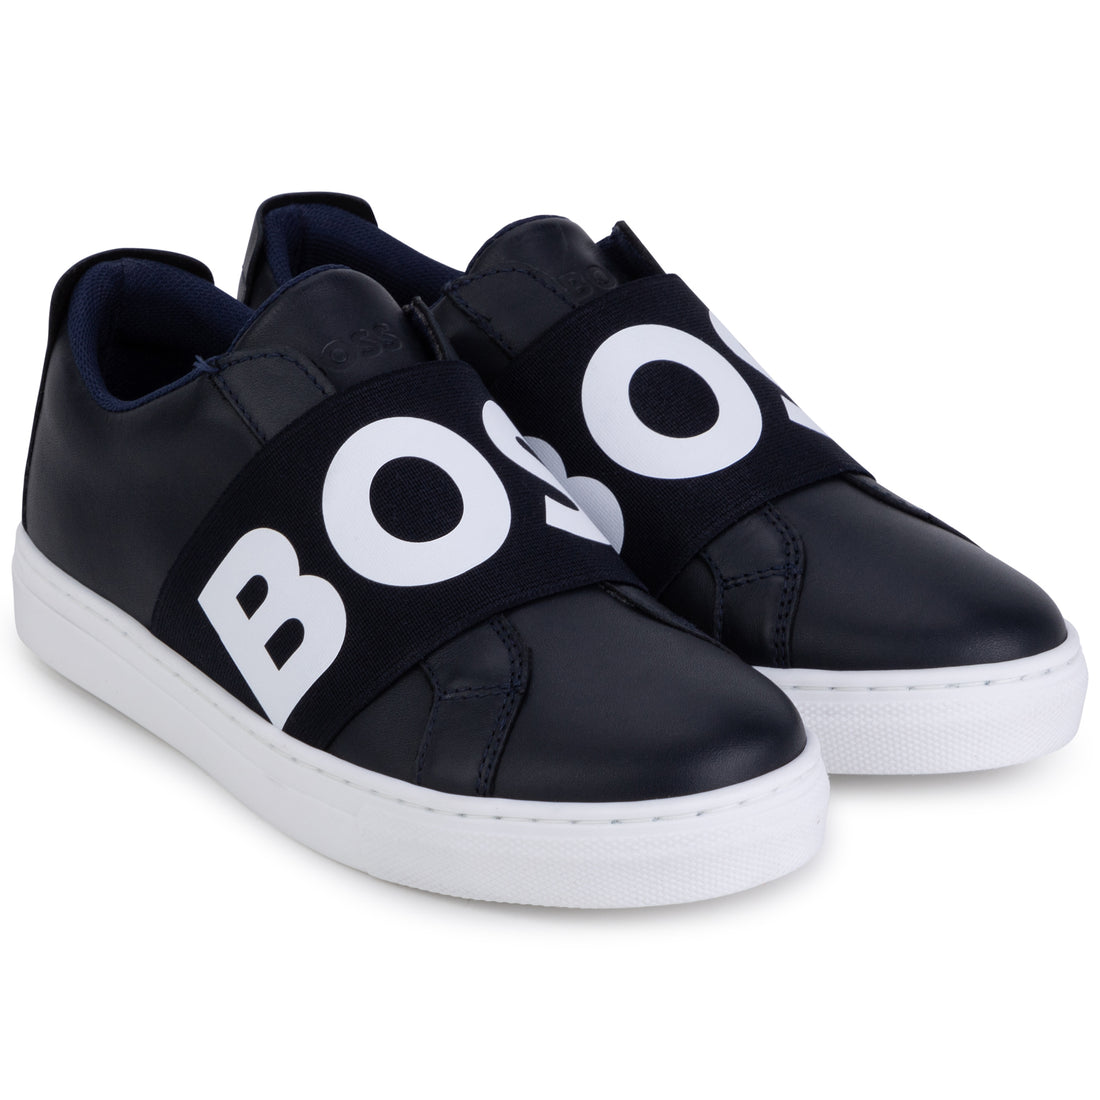 Boss Trainers Style: J29291